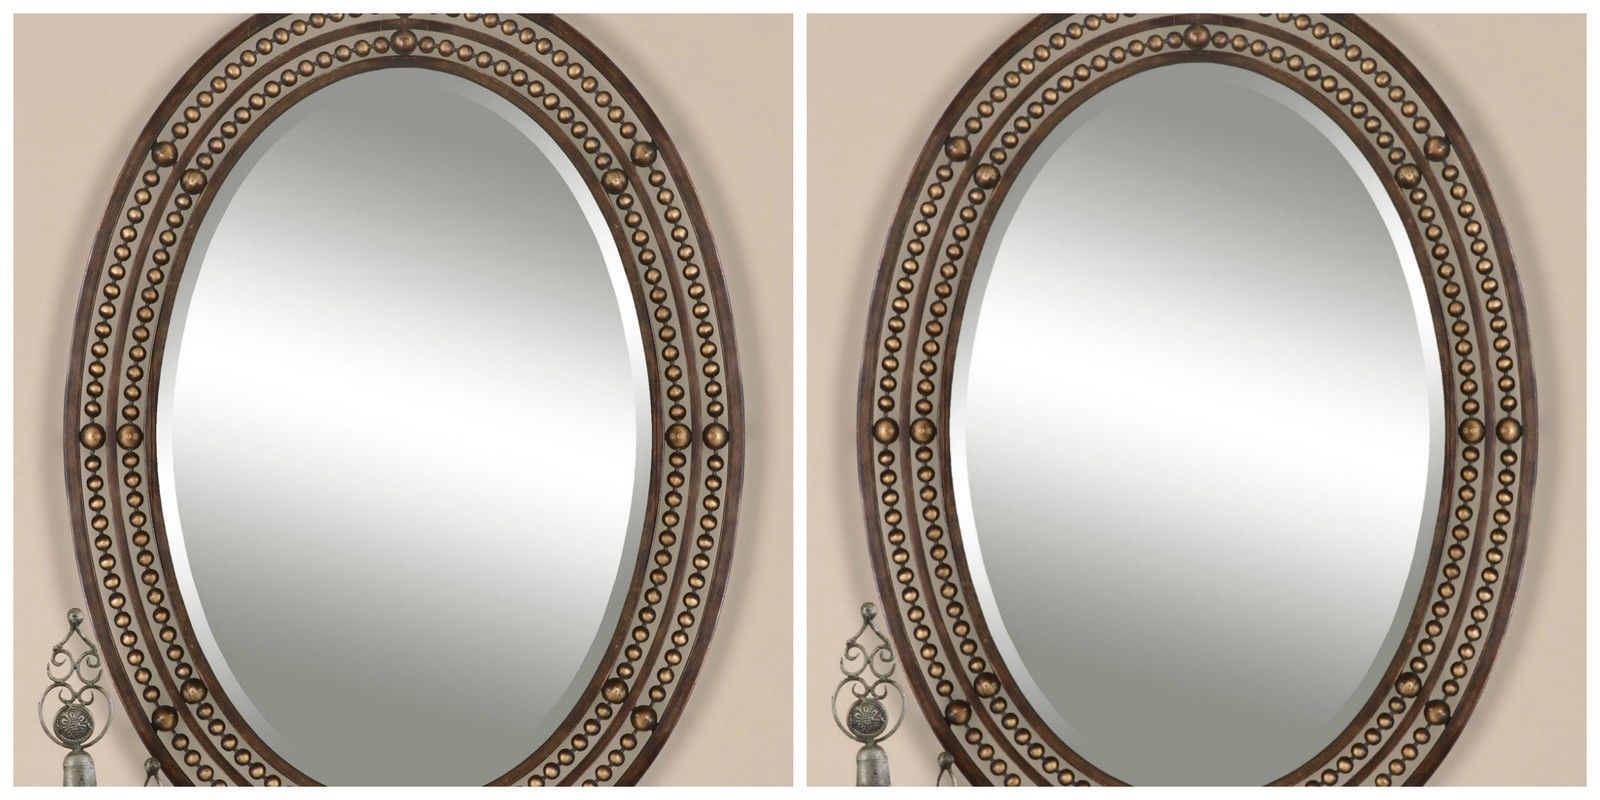 2 Mid Century Inspired Oil Rubbed Bronze Metal Oval Beveled Wall Vanity With Regard To Woven Bronze Metal Wall Mirrors (View 4 of 15)